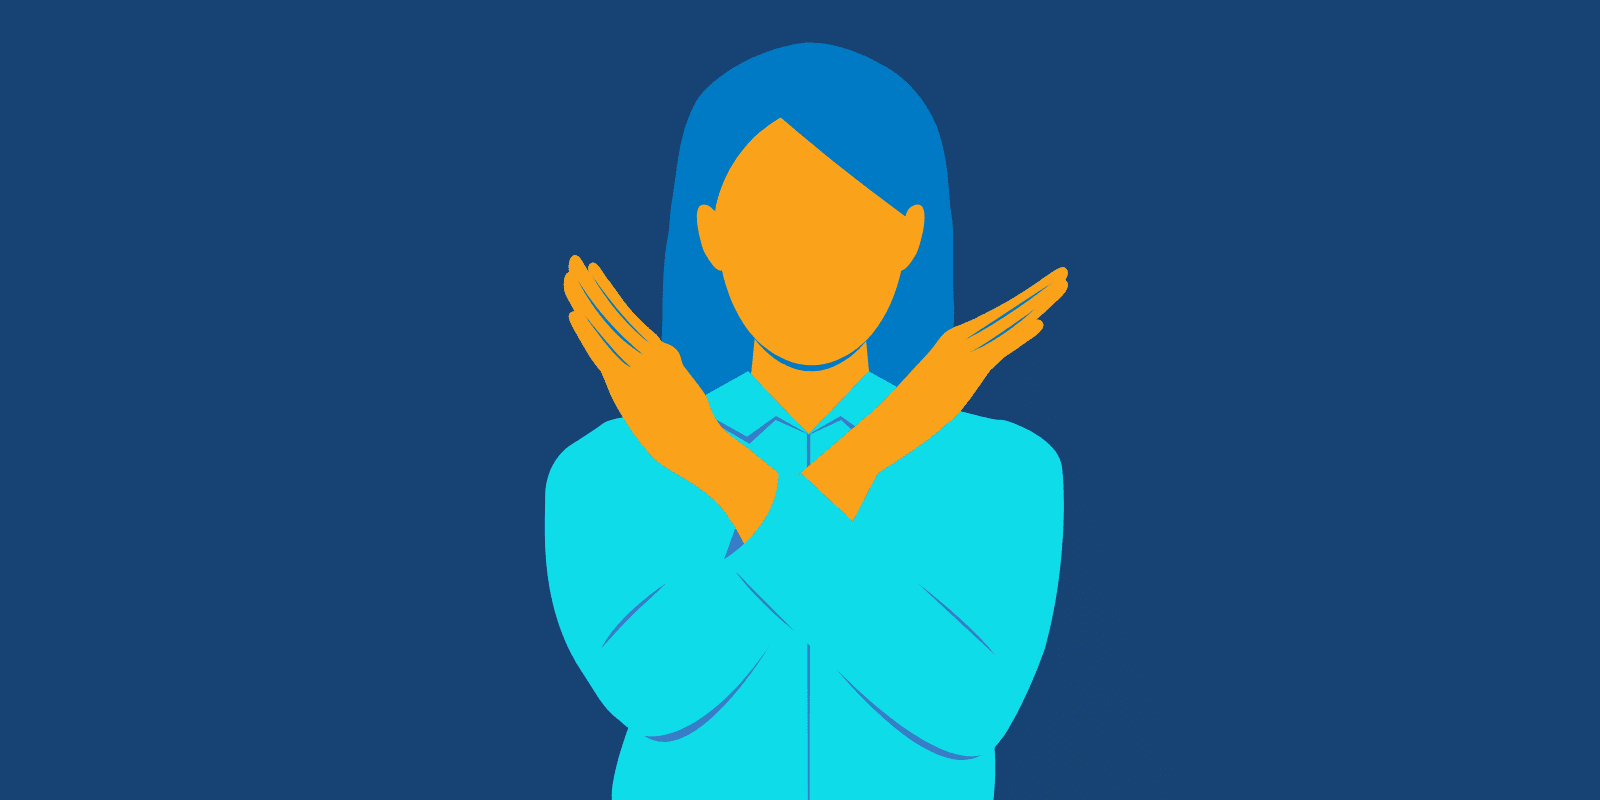 Illustration Of Woman Making X With Her Arms